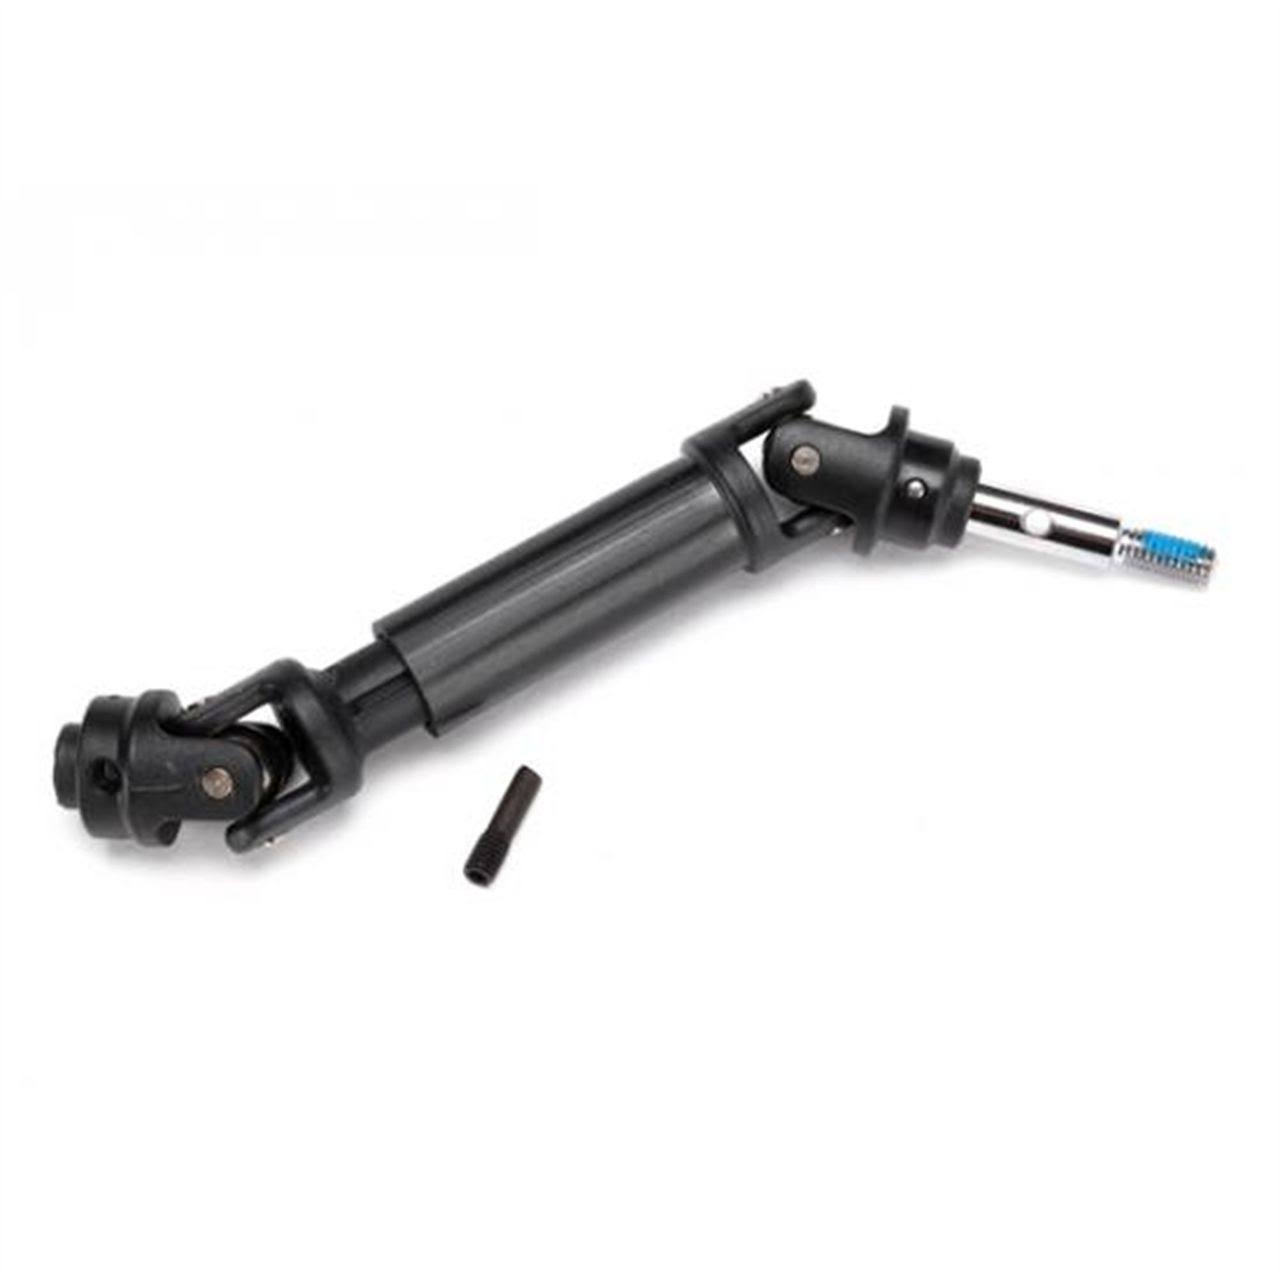 Traxxas TRA6760 Telluride 4x4 Heavy Duty HD Front Driveshaft Assembly - Scale 1:10